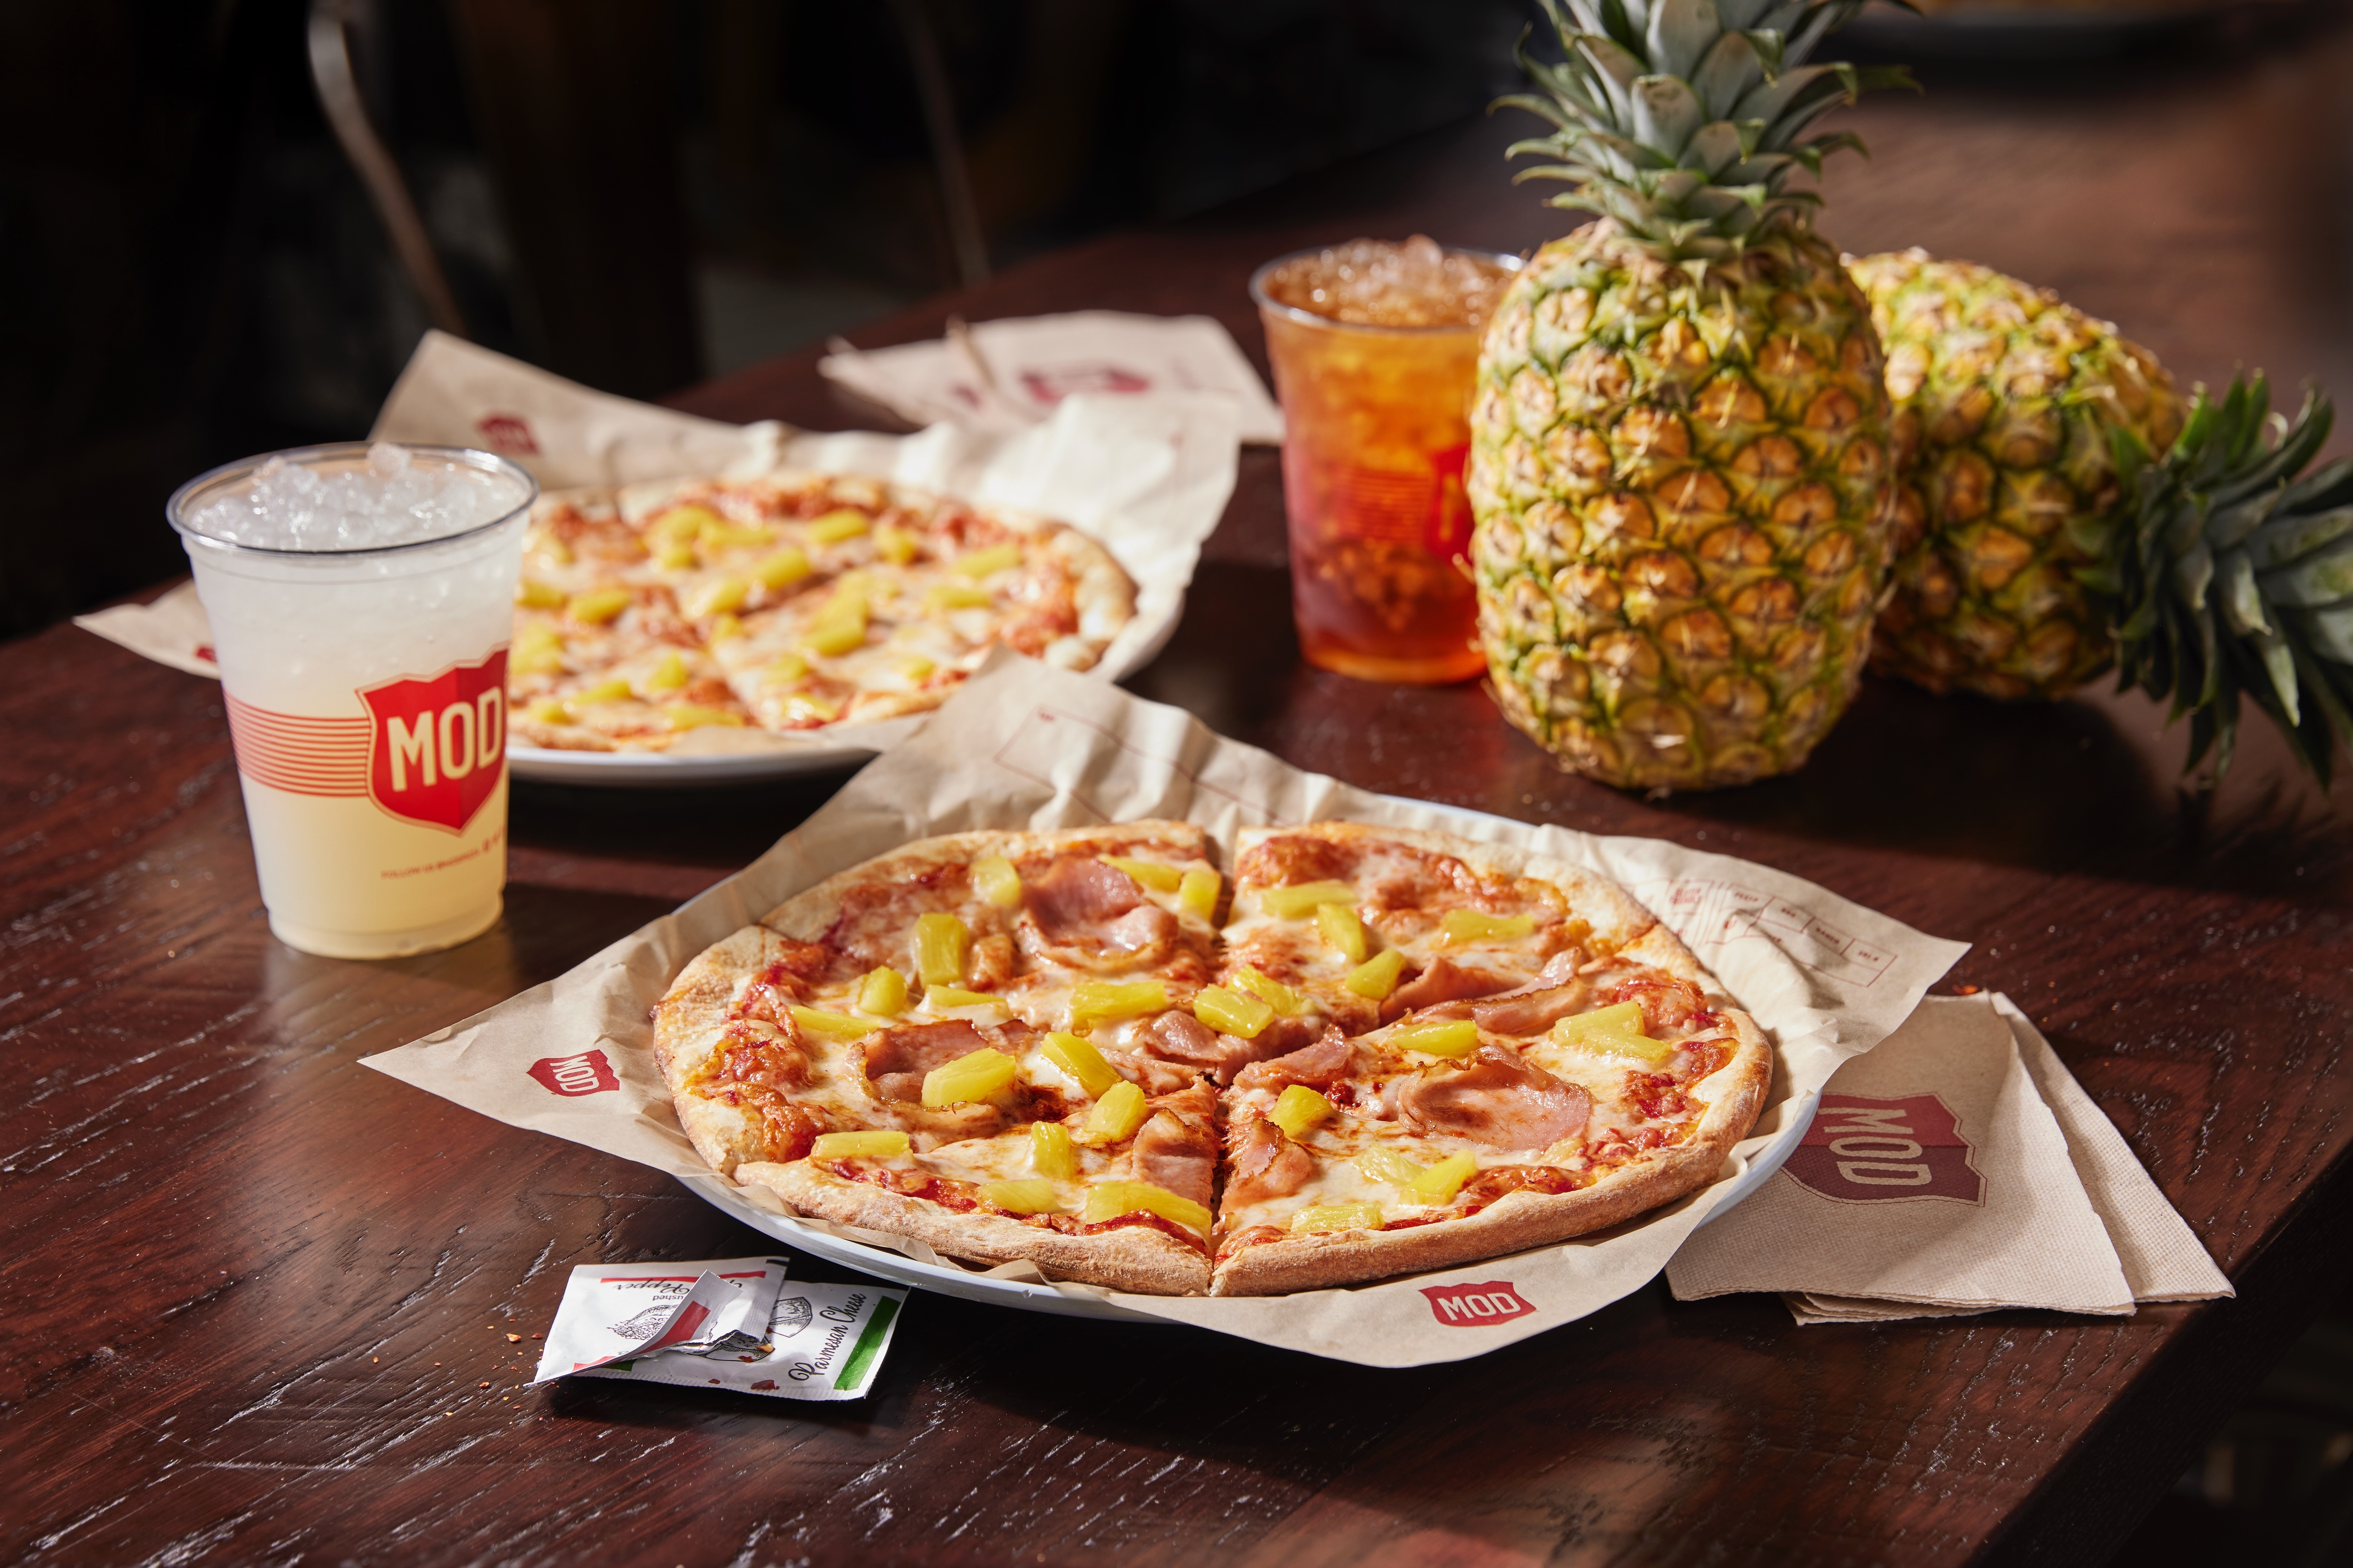 Pineapple on pizza may be divisive, but a new poll finds most Canadians  like it